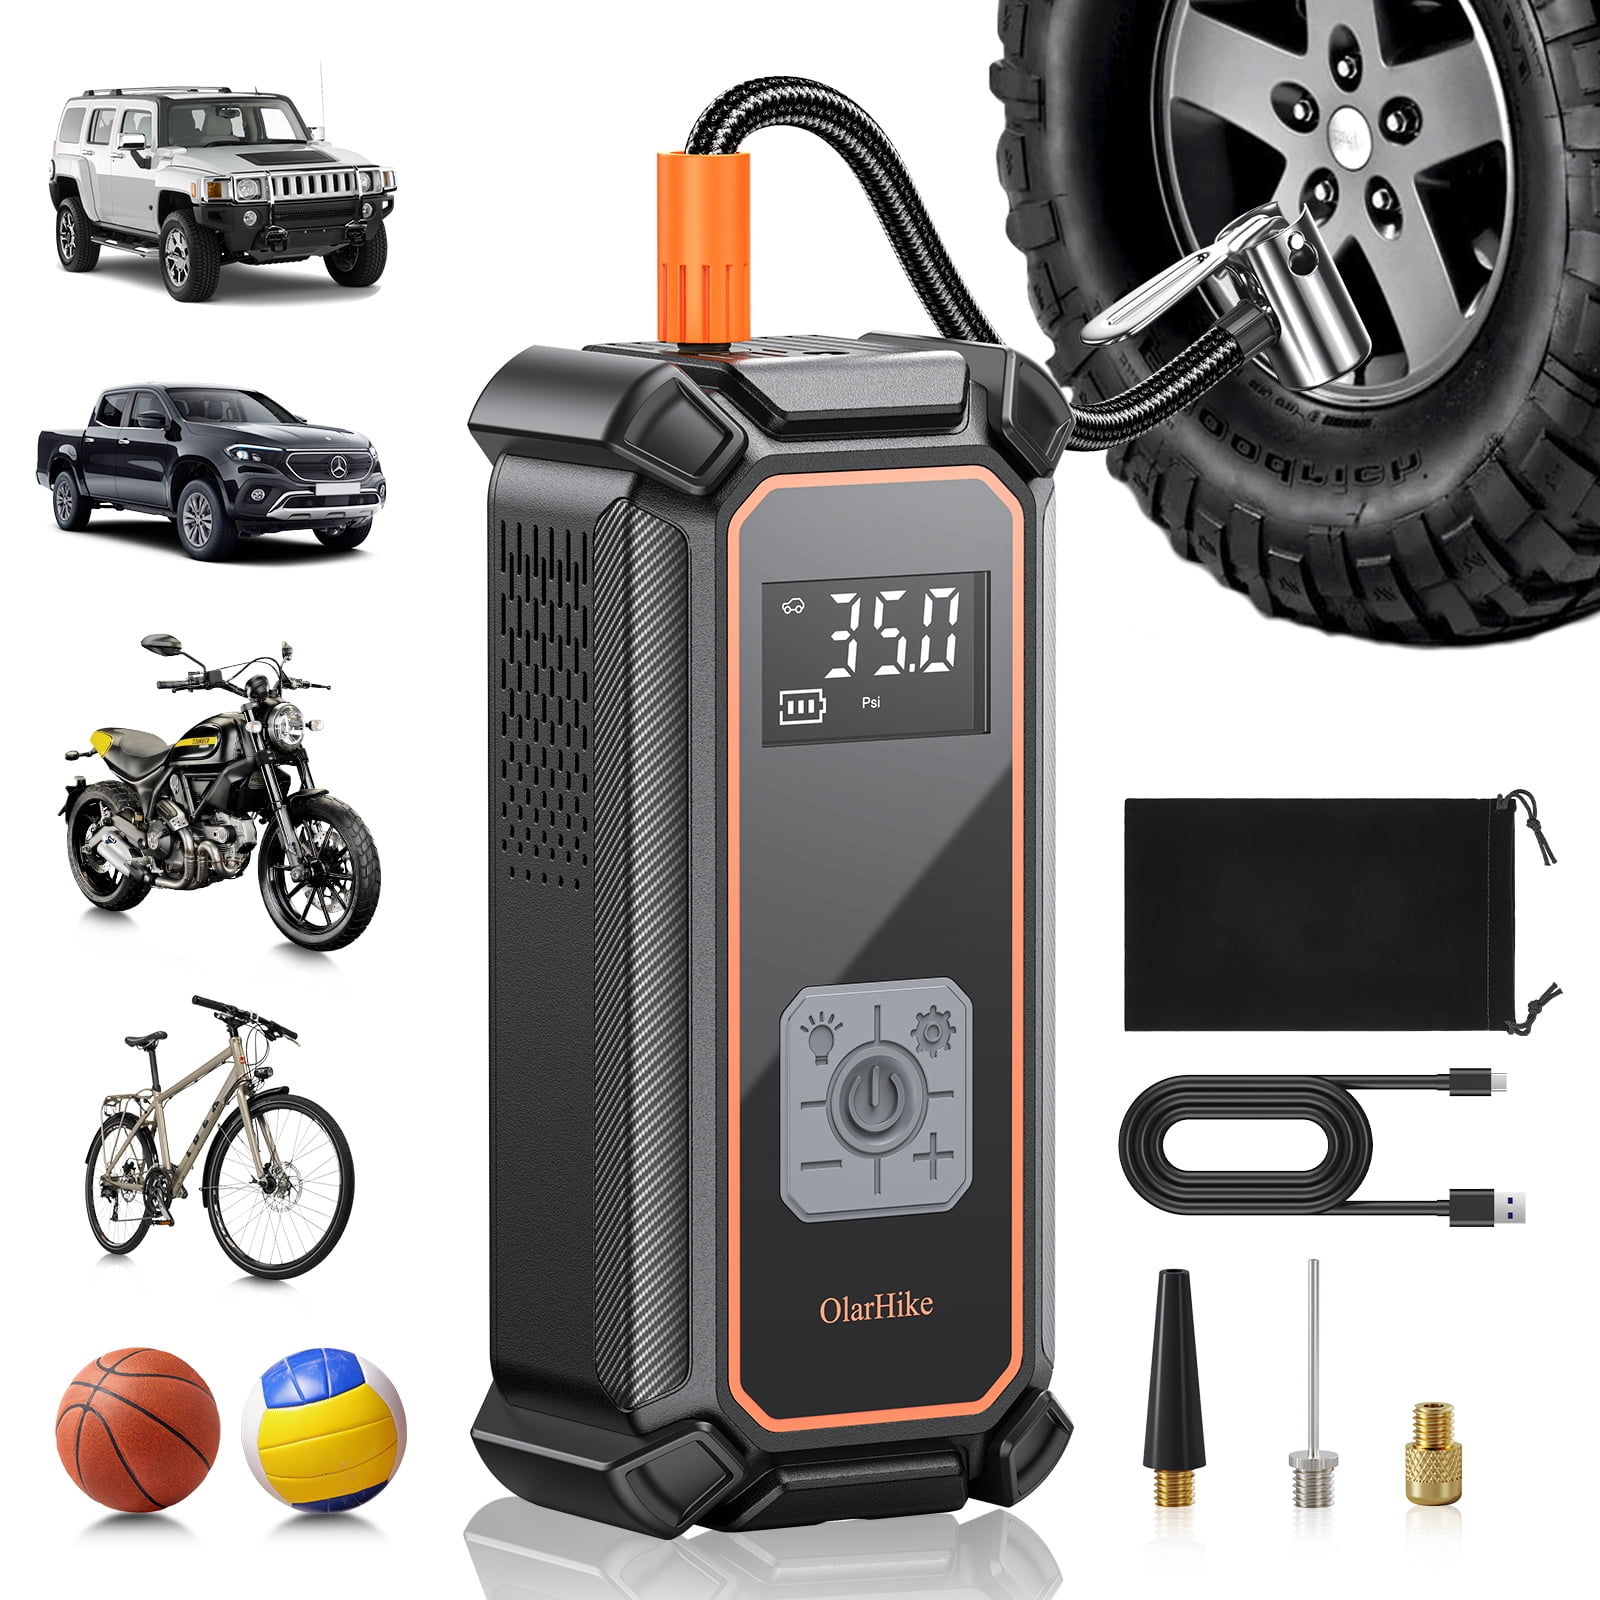 YouKey - DC 12V Wheel Shaped Electric Car Tire Ball Inflator Air